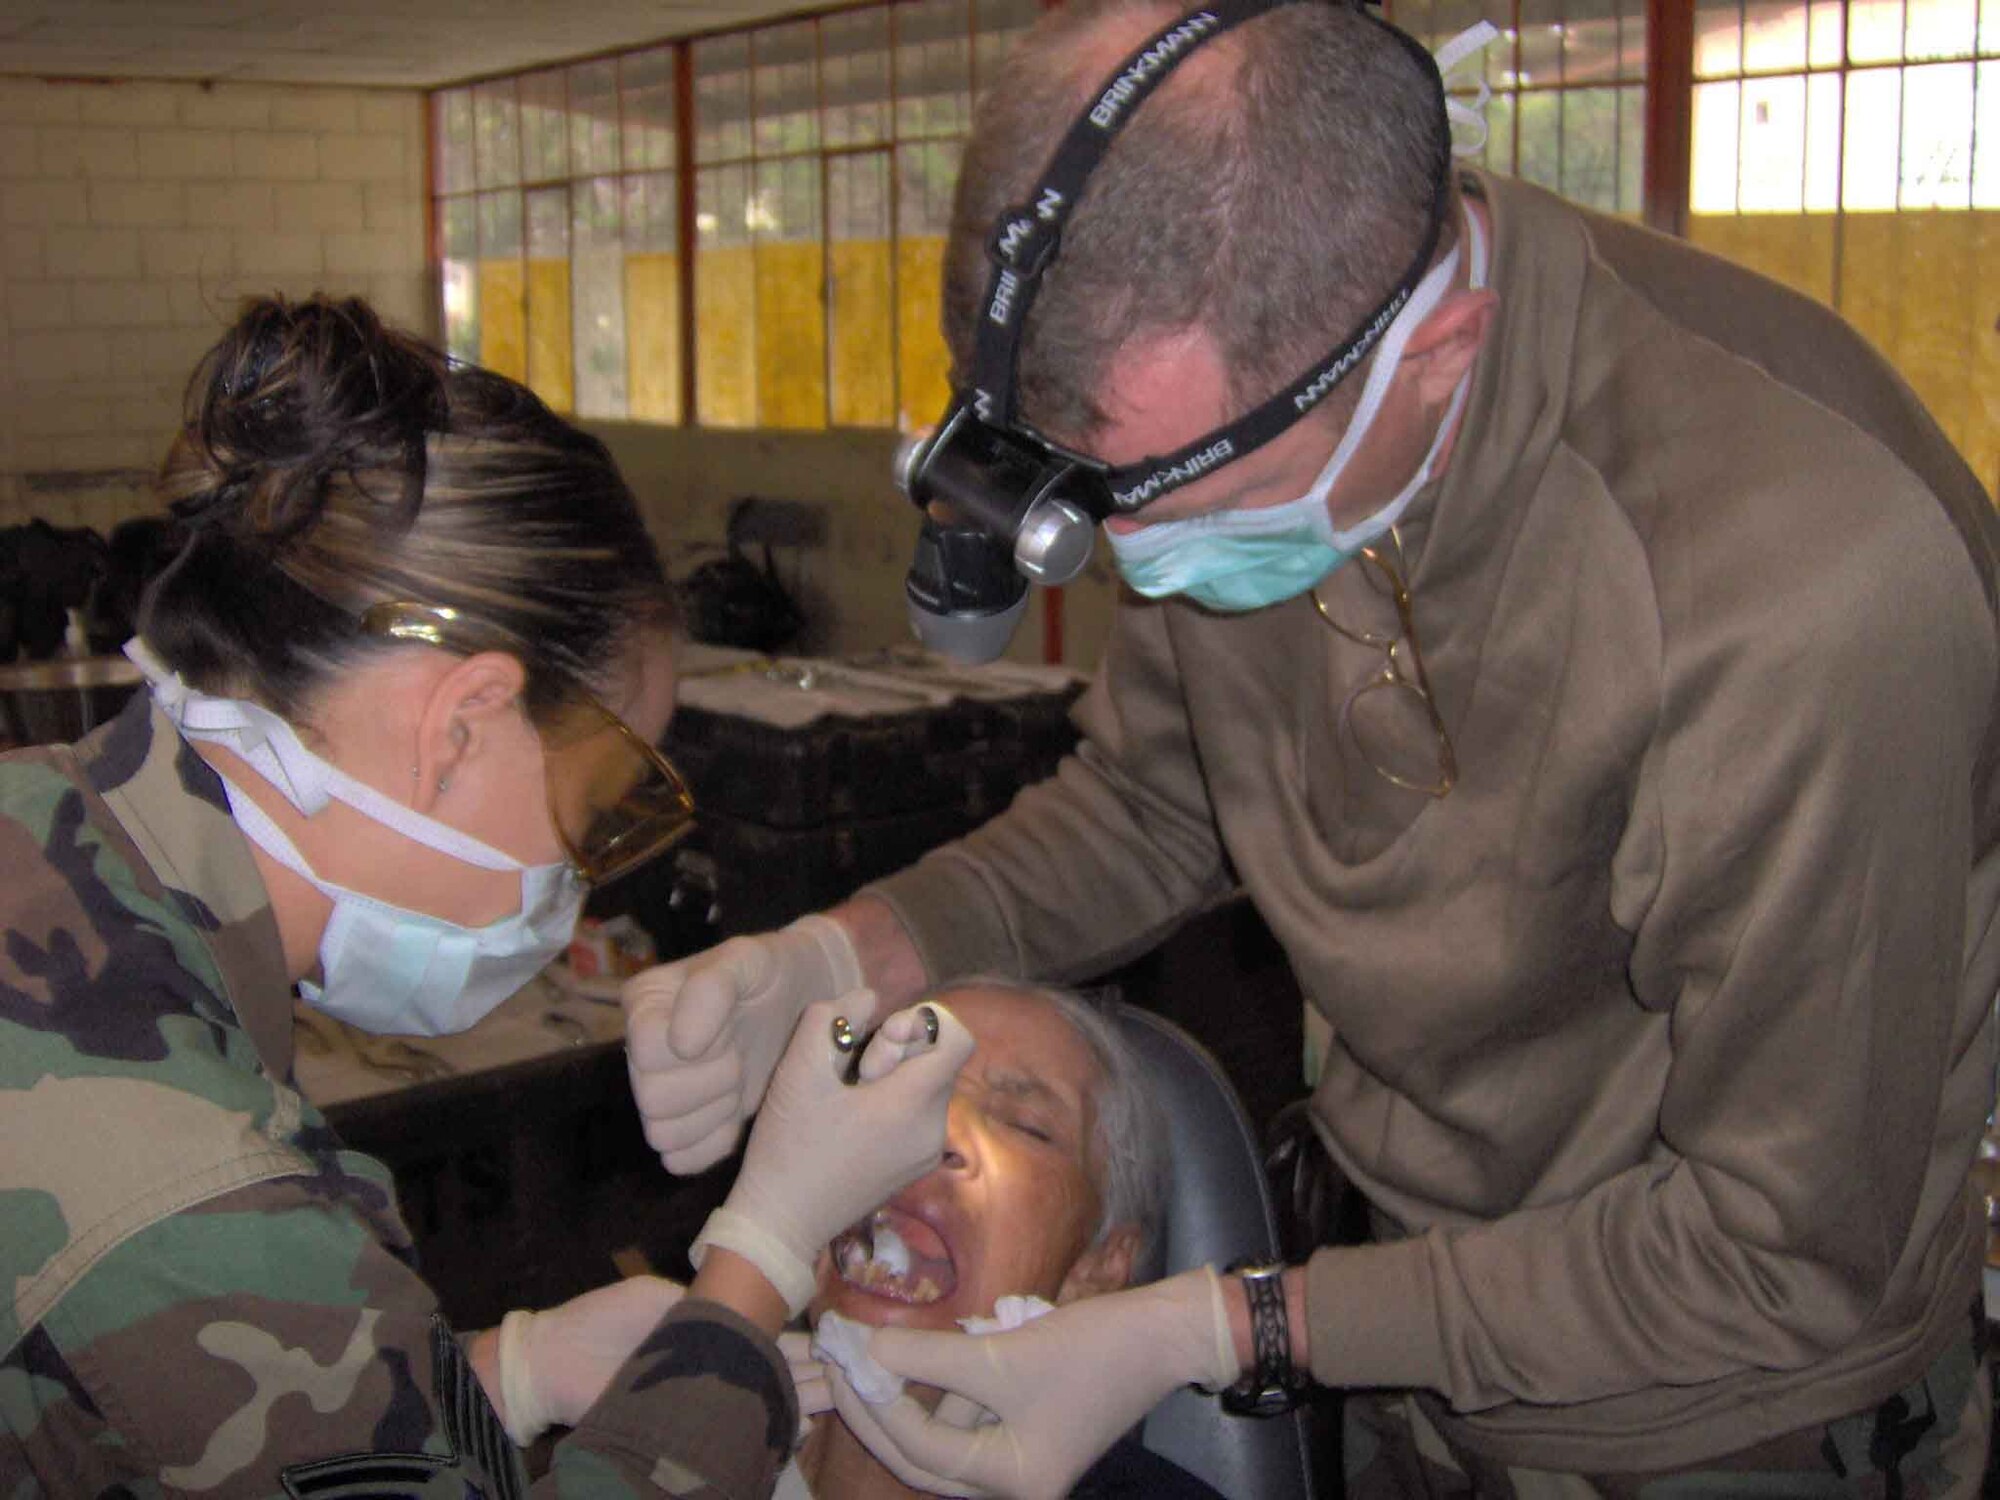 Tech. Sgt. Kristie Wever, 944th Medical Squadron, and Army Capt. Glen Lance, 94th Medical Unit, extract a tooth from an Ecuadorian. Sergeant Wever, a reservist at Luke Air Force Base, Ariz., volunteered to travel to Ecuador with the 94th Medical Unit from Seagoville, Texas, as part of a Medical Readiness Training Exercise.